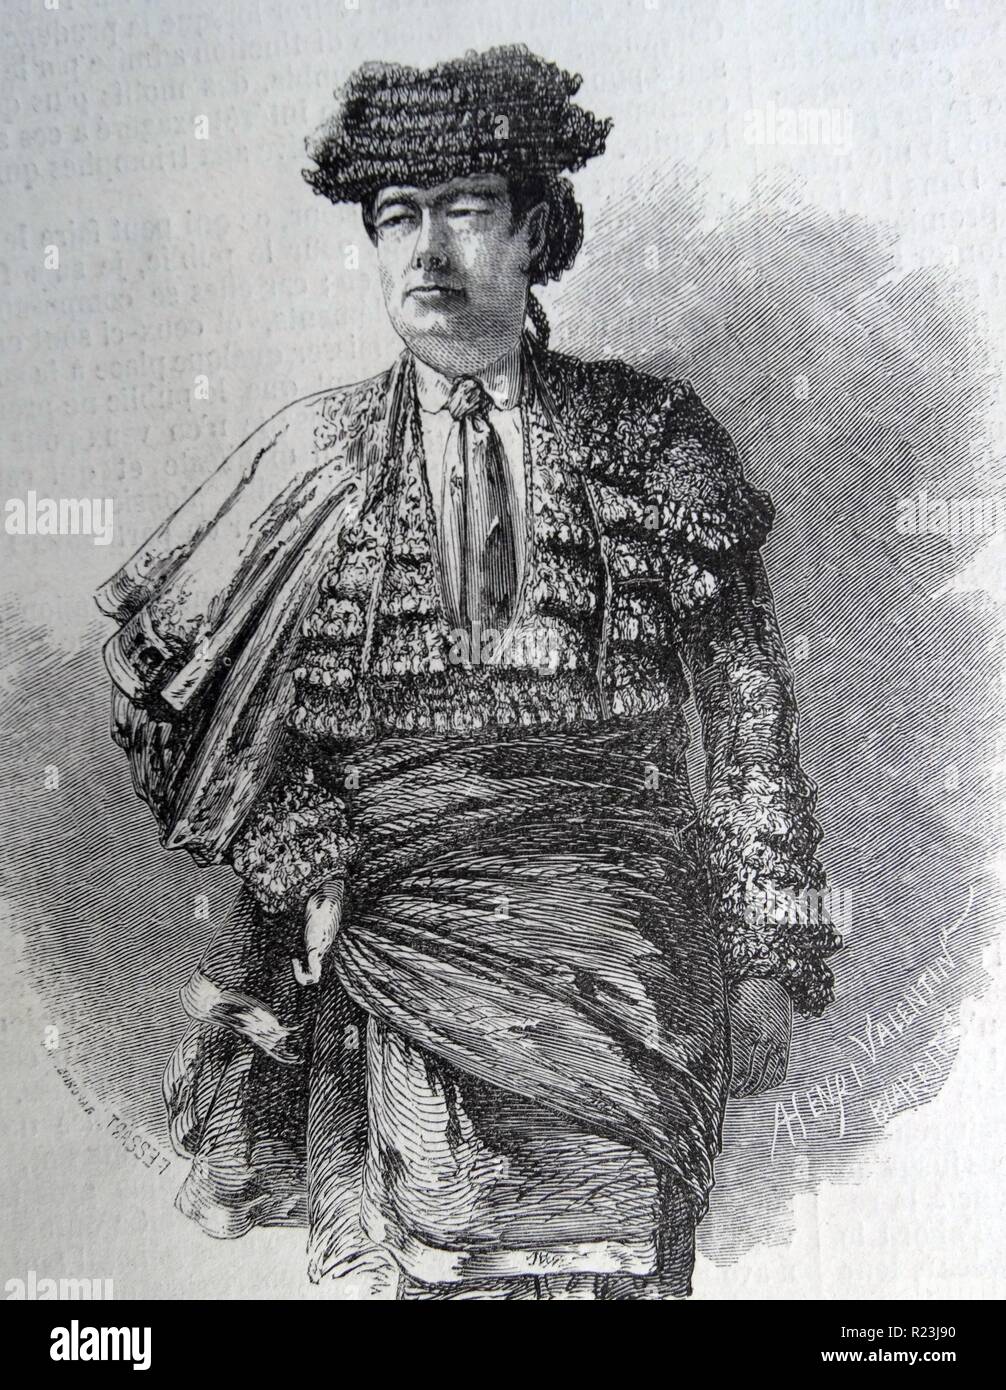 Illustrated portrait of Arjona Francisco Guillen (1818-1868). Also known as 'Cuchares', he was an infamous bullfighter. Dated 1860 Stock Photo